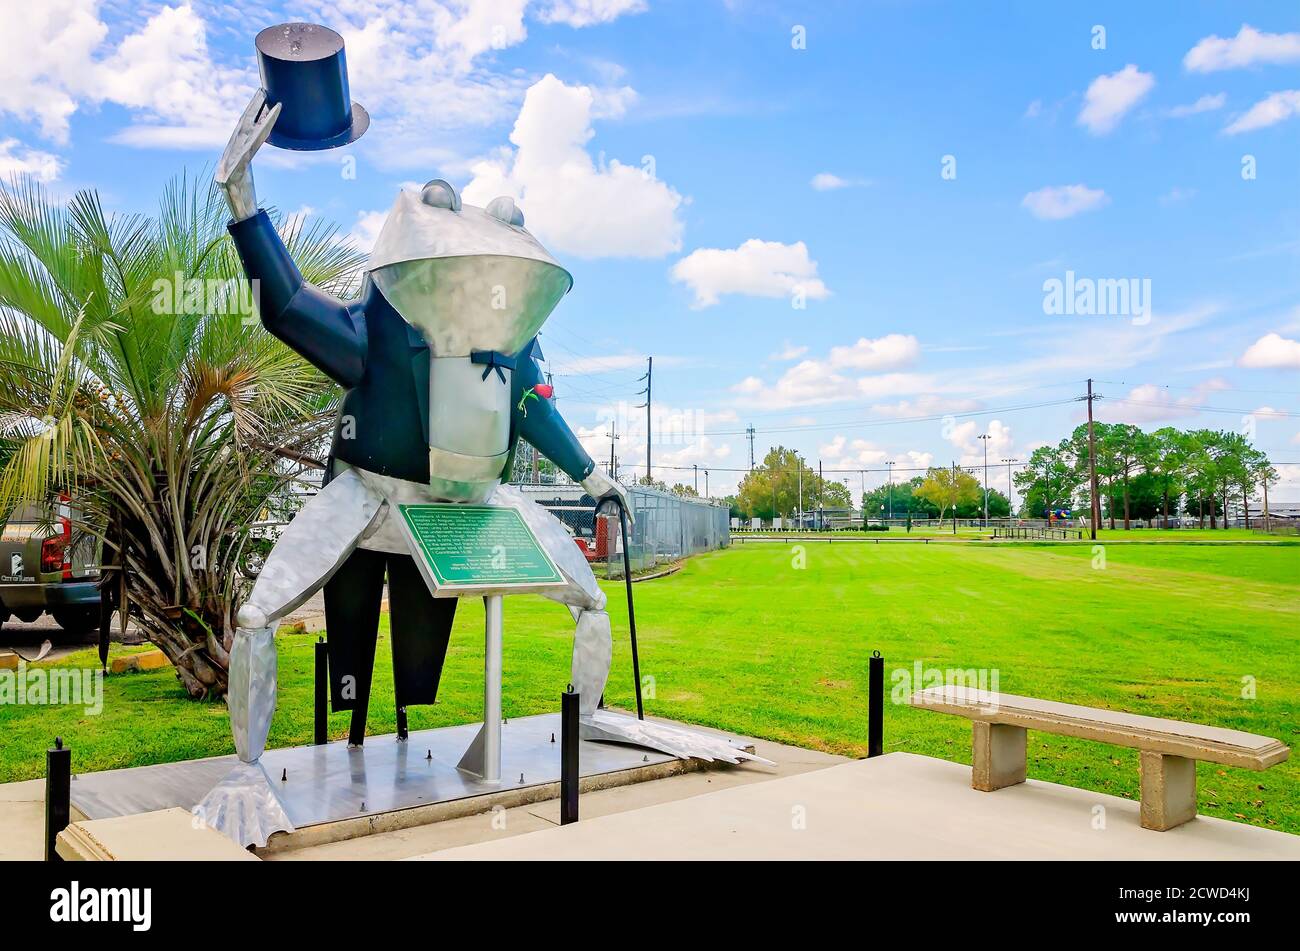 Monsieur Jacques, a giant frog statue, is pictured, Sept. 12, 2020, in Rayne, Louisiana. The city bills itself as the “Frog Capital of the World.' Stock Photo